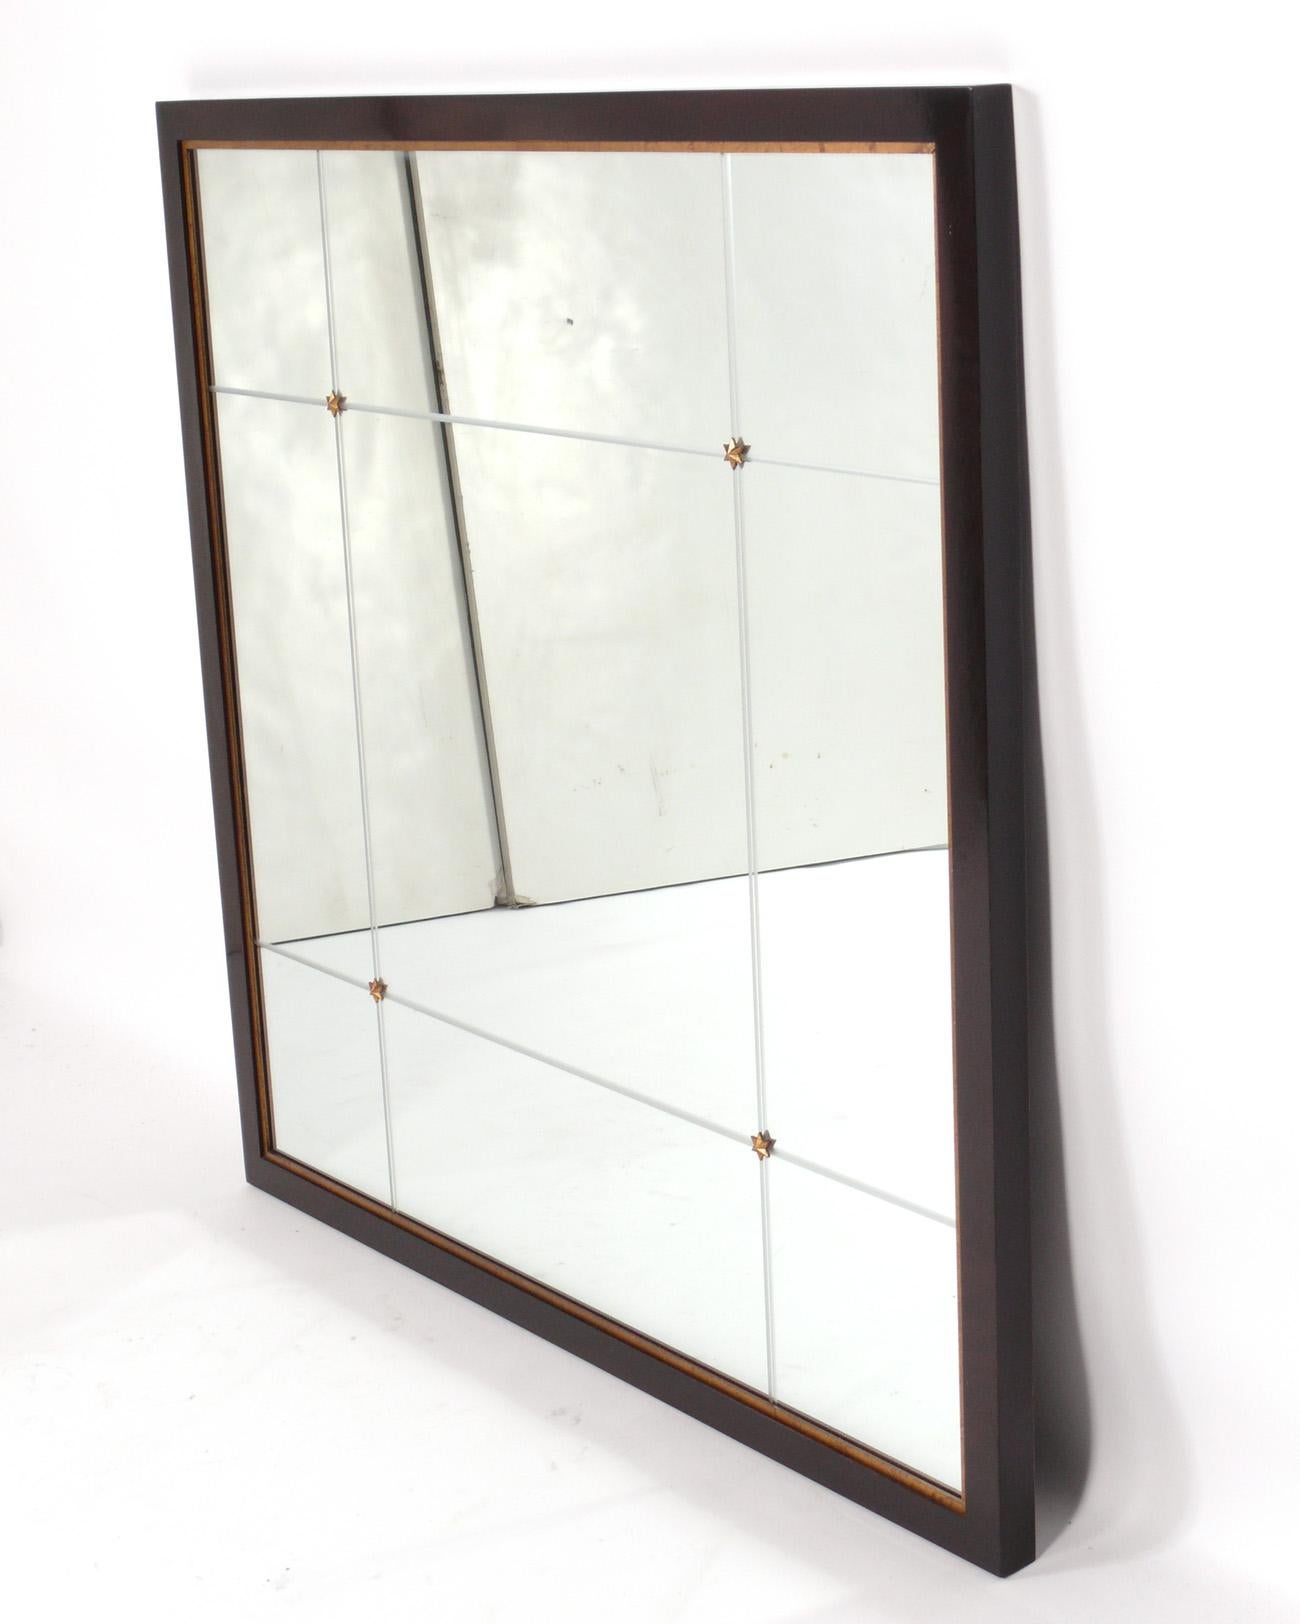 Elegant square mirror, designed by Barbara Barry for Baker, circa 2000s. This mirror was recently removed from the legendary Carlyle Hotel in NYC. It measures an impressive 44